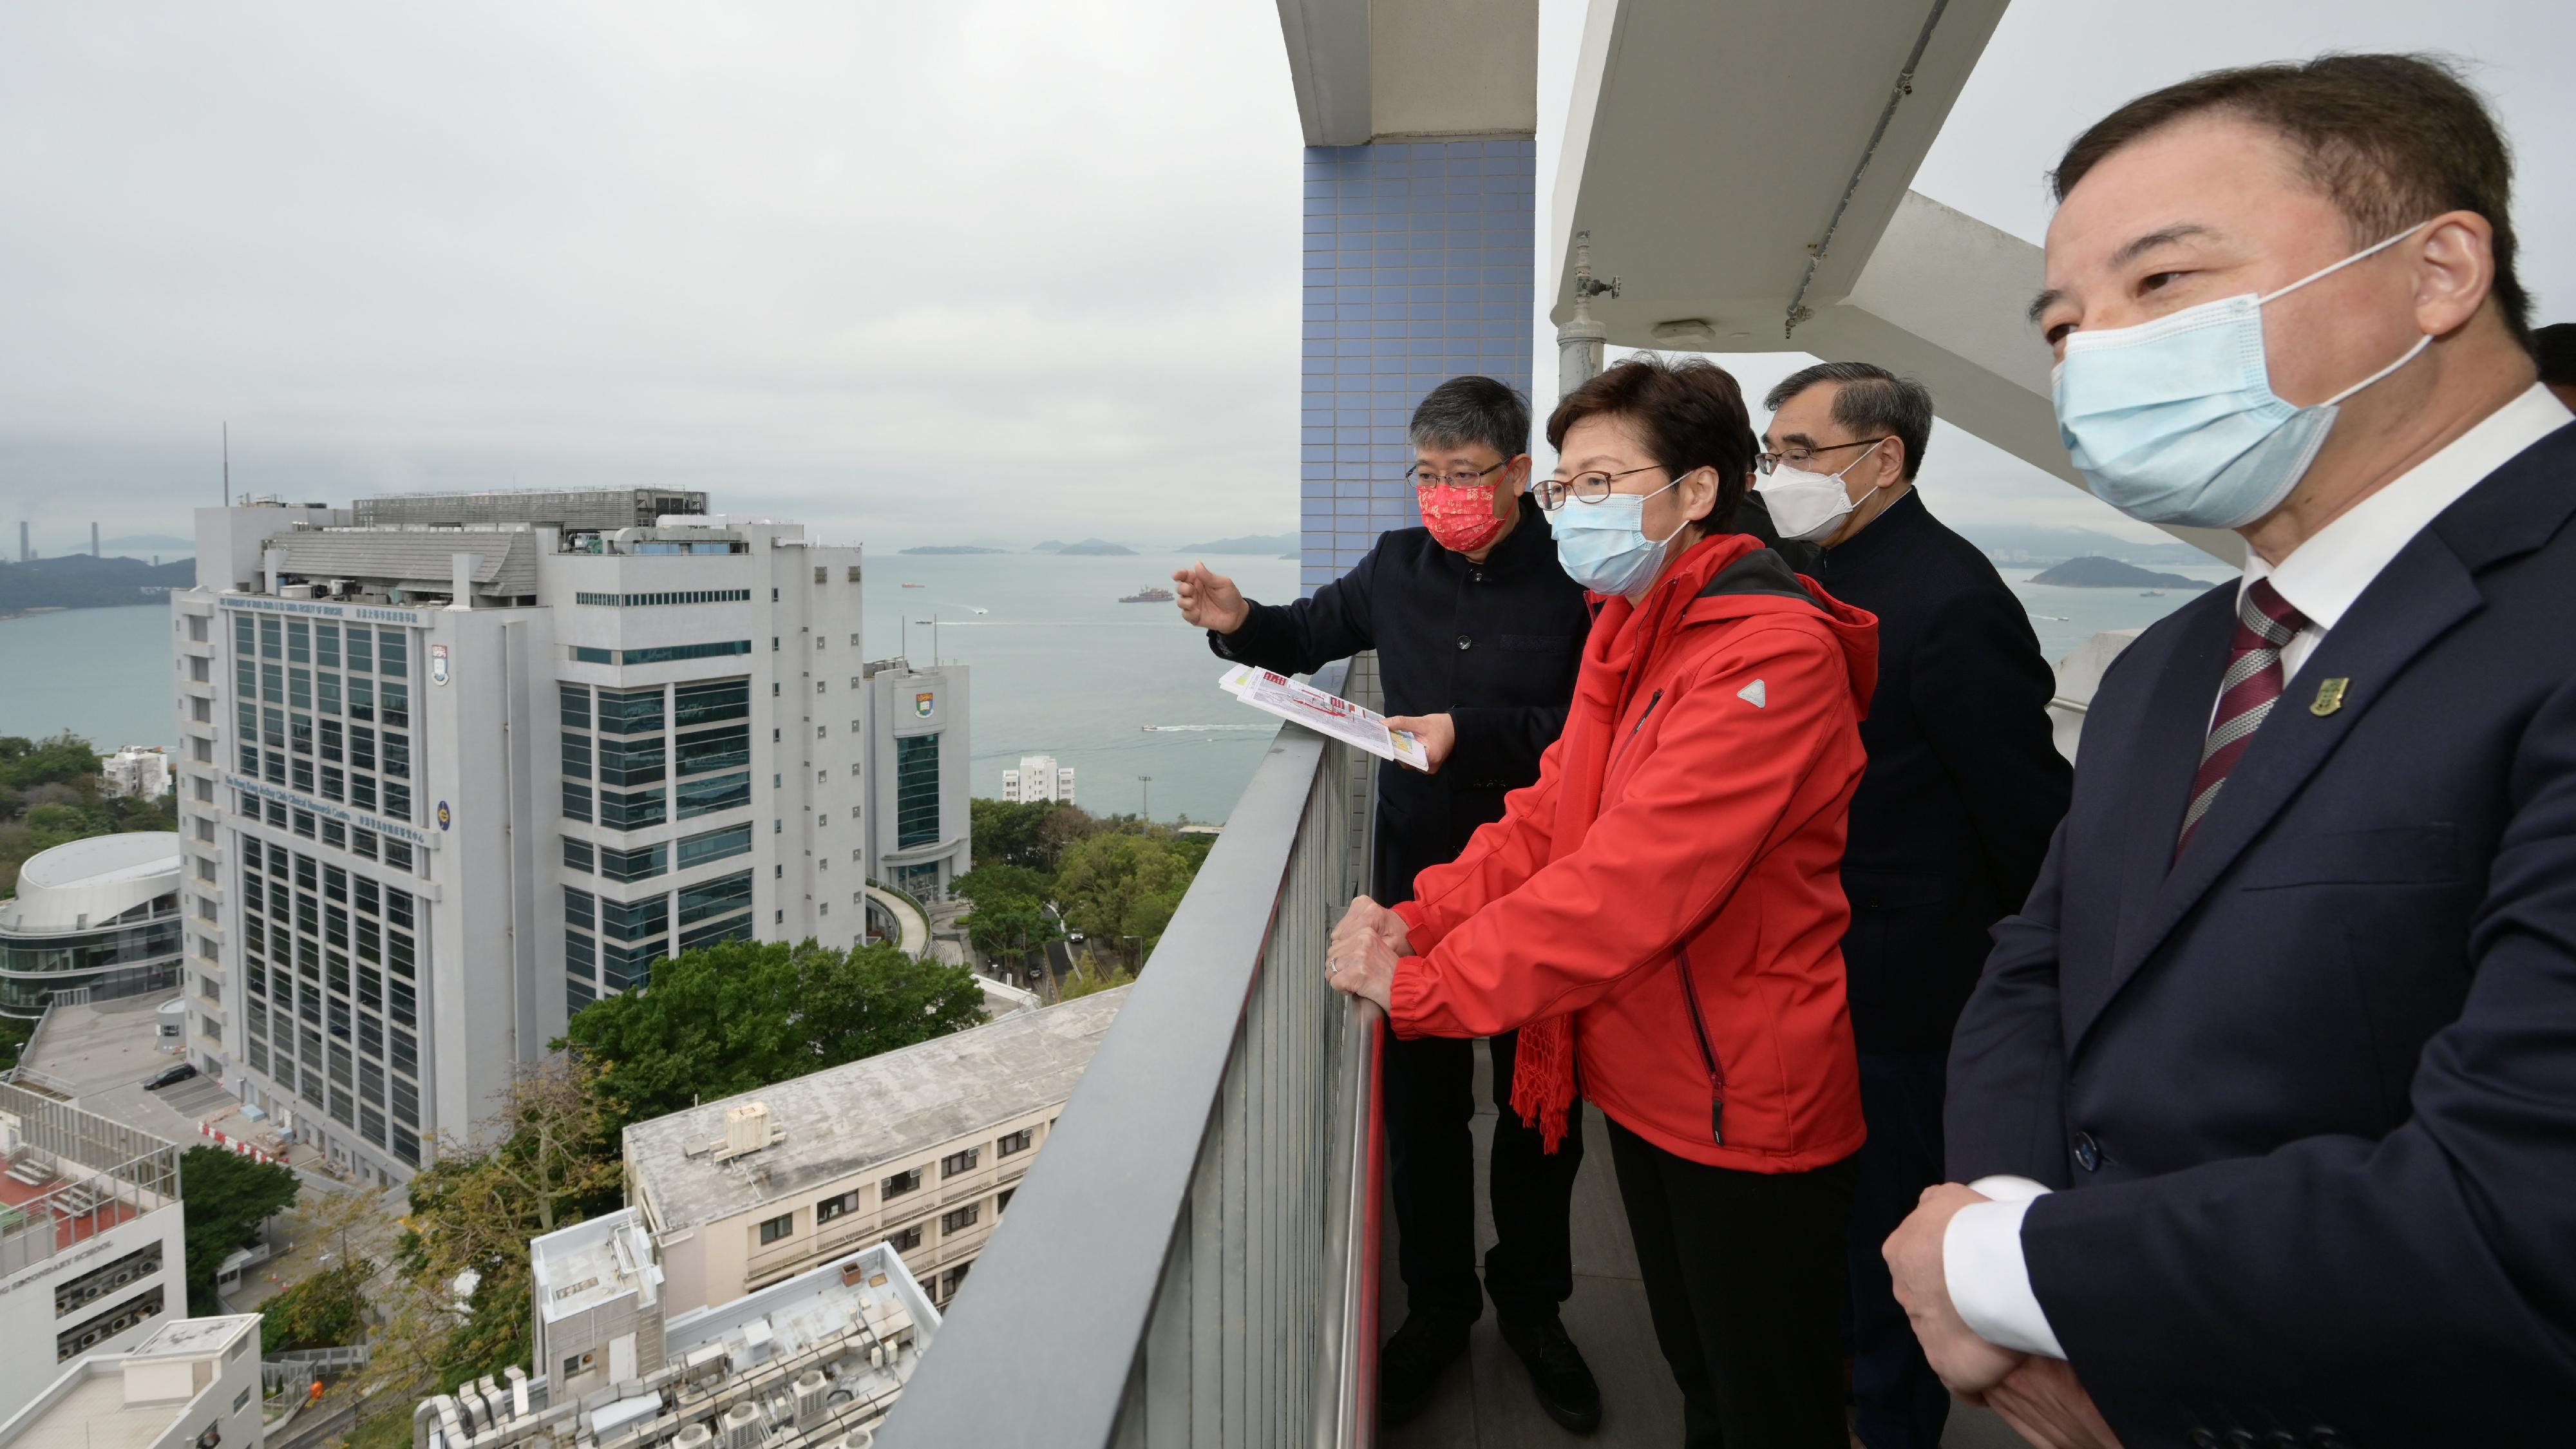 The Chief Executive, Mrs Carrie Lam, today (February 2) inspected a site in Pok Fu Lam where the University of Hong Kong (HKU) plans to build facilities for technological research. Photo shows Mrs Lam (second left), accompanied by the President and Vice-Chancellor of HKU, Professor Zhang Xiang (first right), being briefed on the project development.
